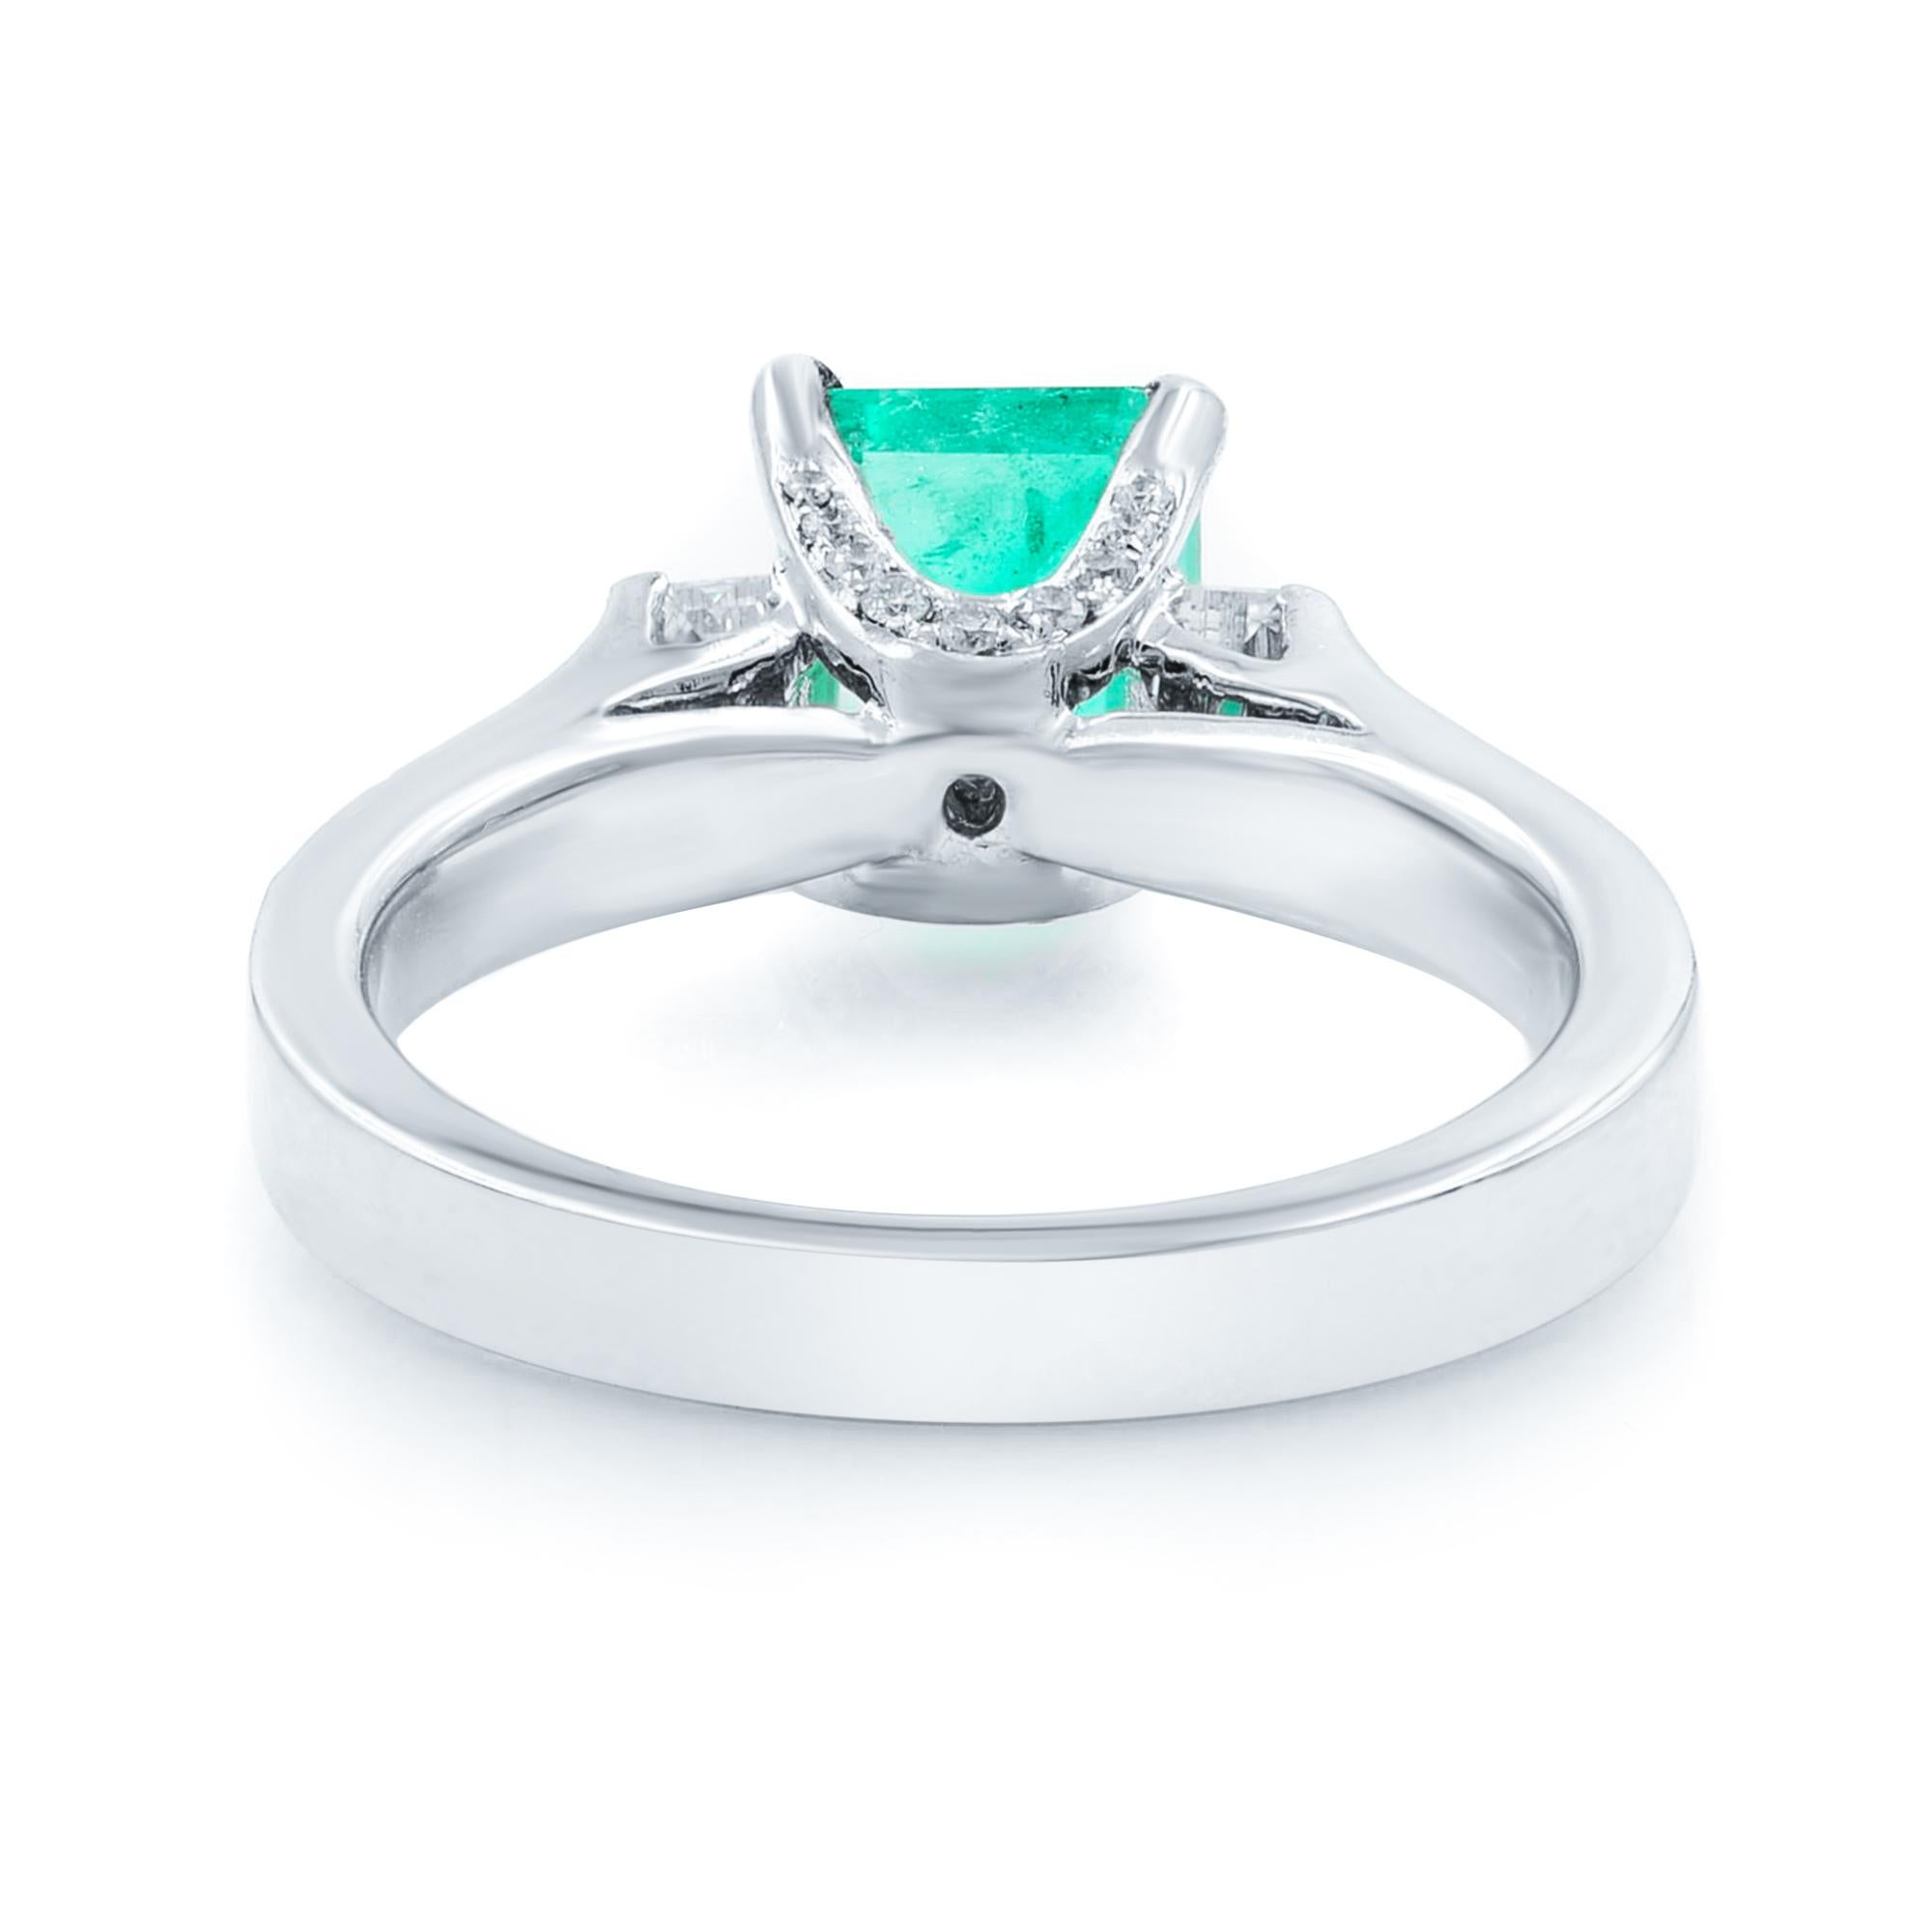 A gorgeous, richly saturated, crystalline green, sleekly modeled, emerald-cut Colombian emerald, weighing 1.71 carats. Glistens and glows between double rows of round brilliant-cut diamonds in this classic and pristine estate jewel crafted in